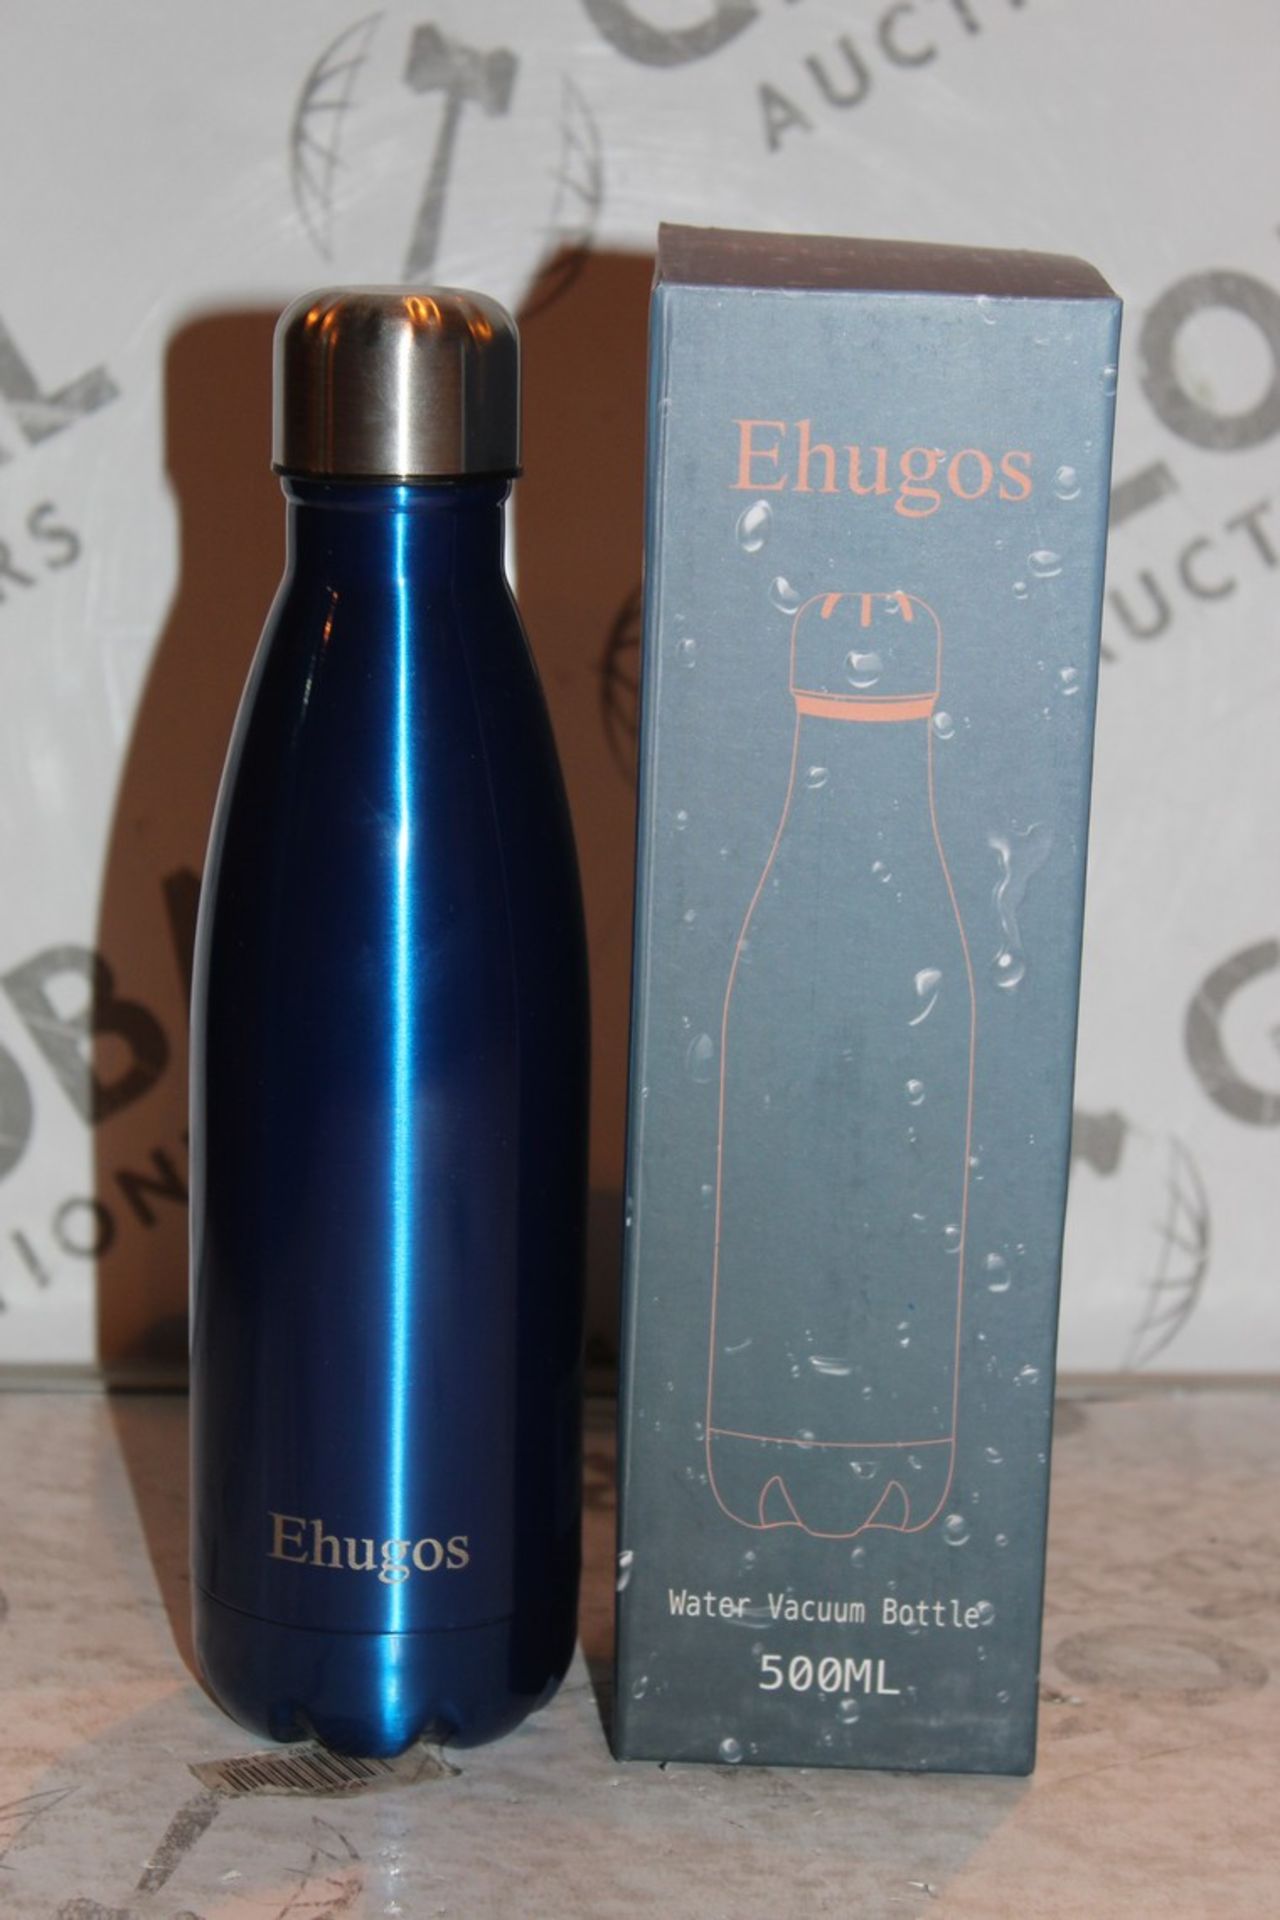 Lot to Contain 12 Boxed Brand New Ehugos 500ml Water Vacuum Bottles